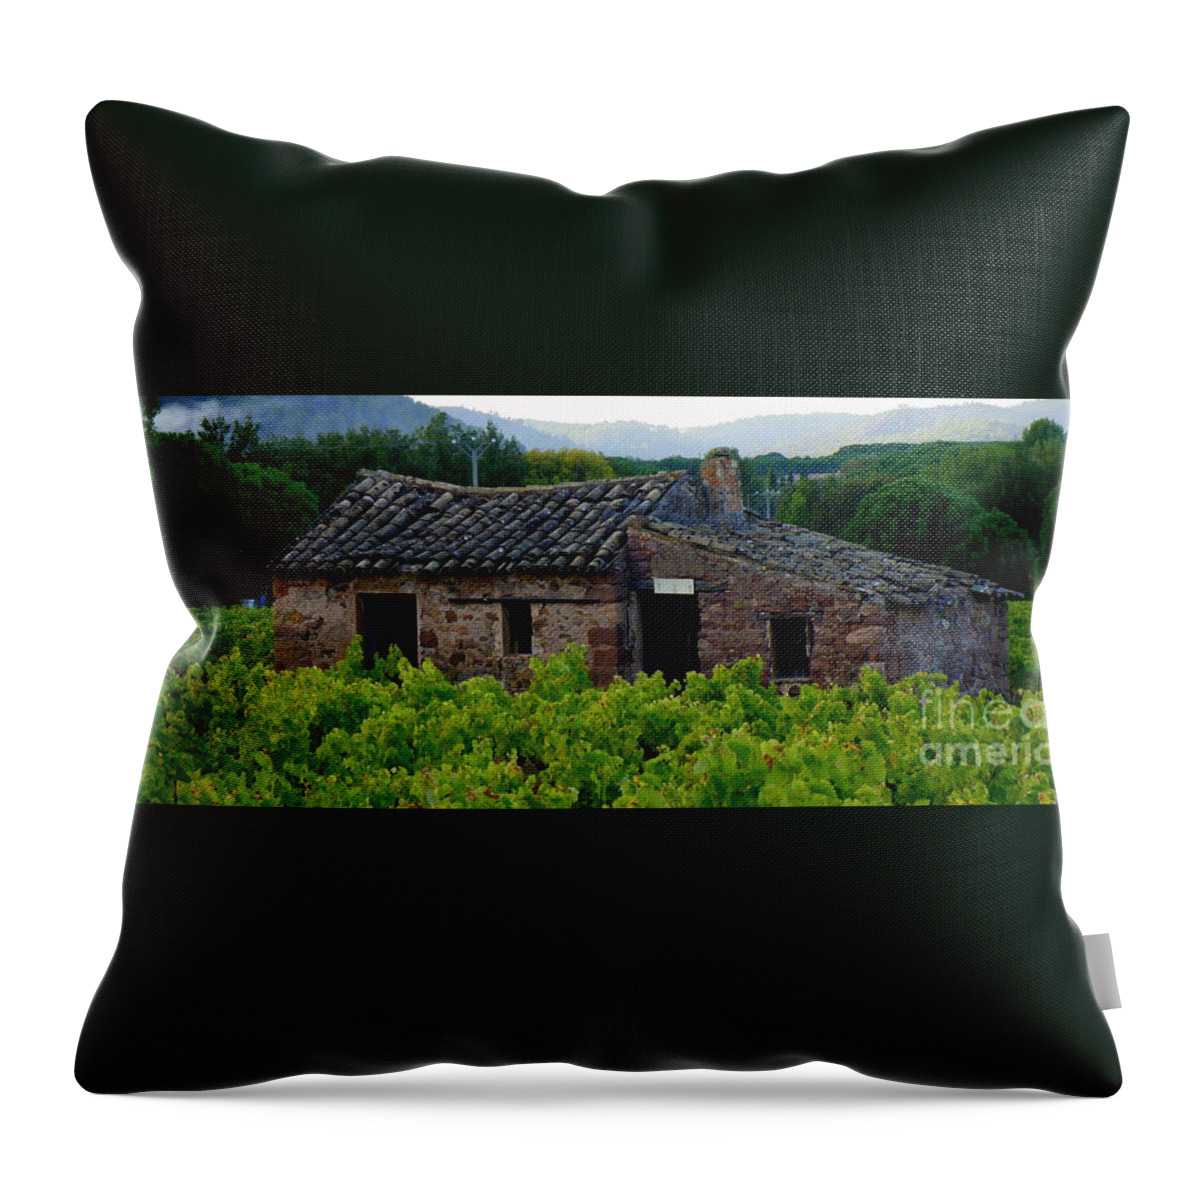 Cabanon Throw Pillow featuring the photograph Cabanon by Lainie Wrightson